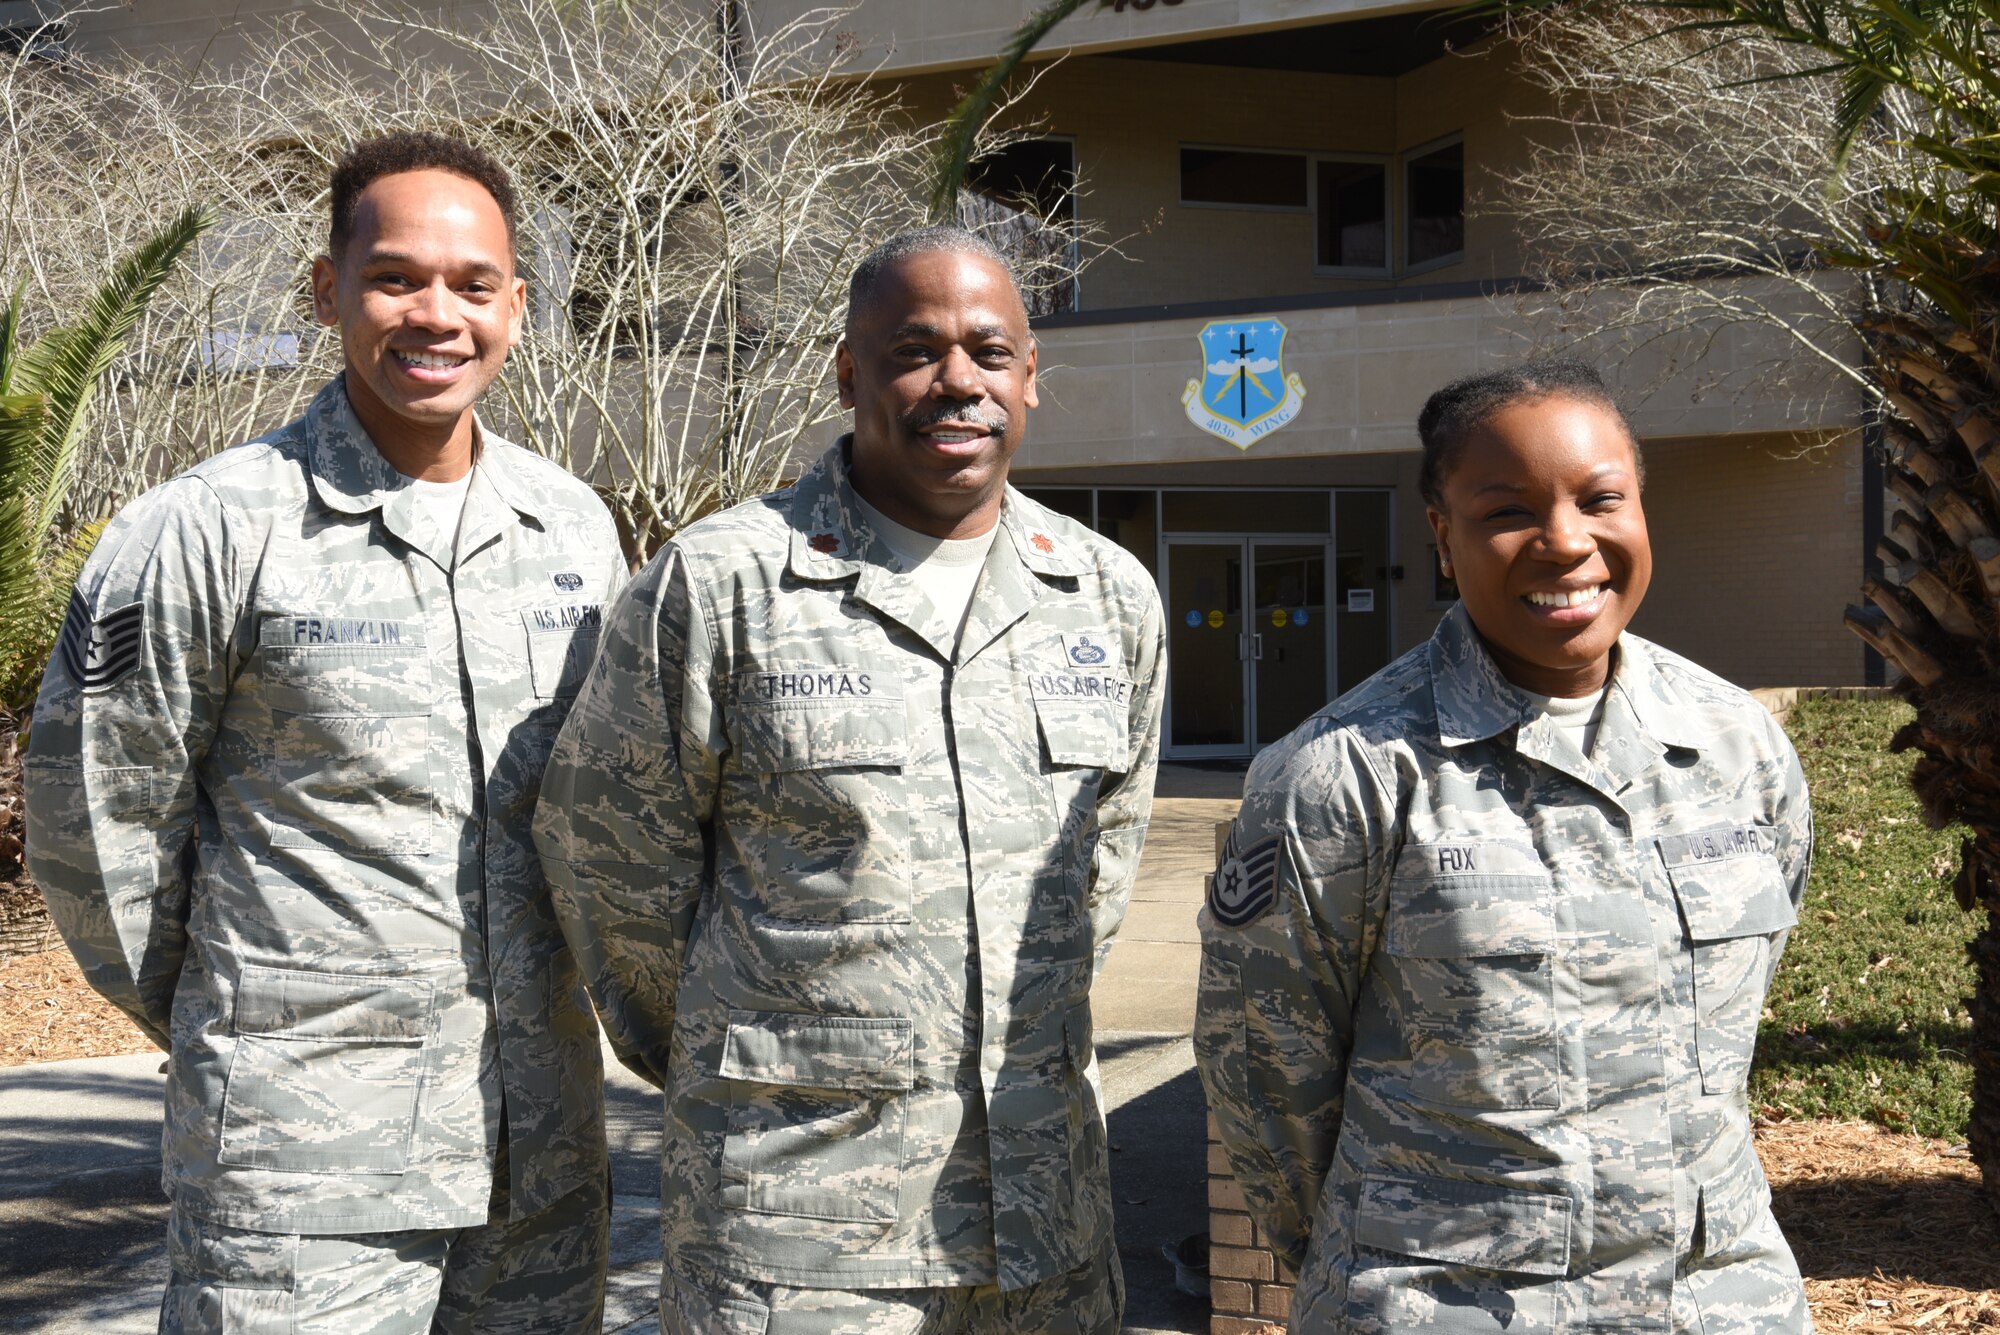 (left to right) Tech. Sgt. Lorenzo Franklin, Major Terry Thomas and Tech Sgt. Dominique Fox are the Equal Opportunity team members of the 403rd Wing at Keesler Air Force Base, Biloxi, Mississippi. (U.S. Air Force photo by Tech. Sgt. Michael Farrar)